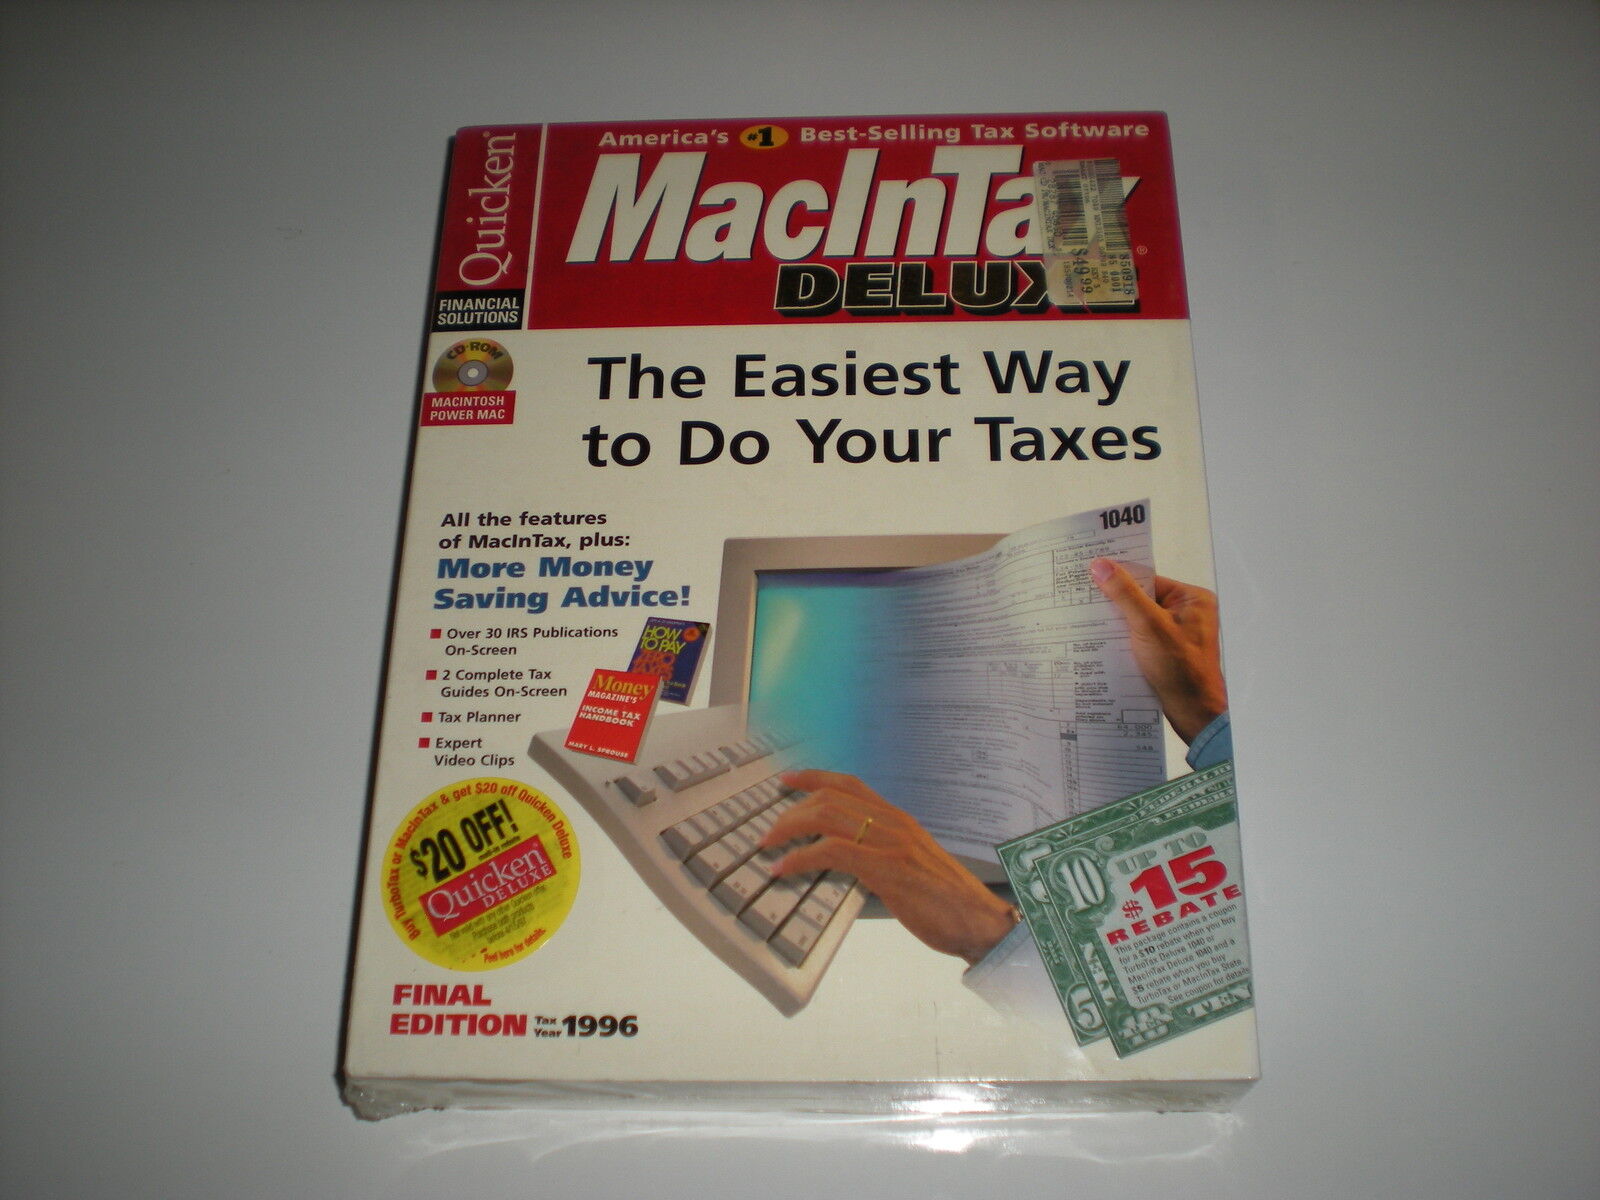 Macintax 1996 Deluxe by Turbotax (Intuit) for Macintosh System 7. New in box.